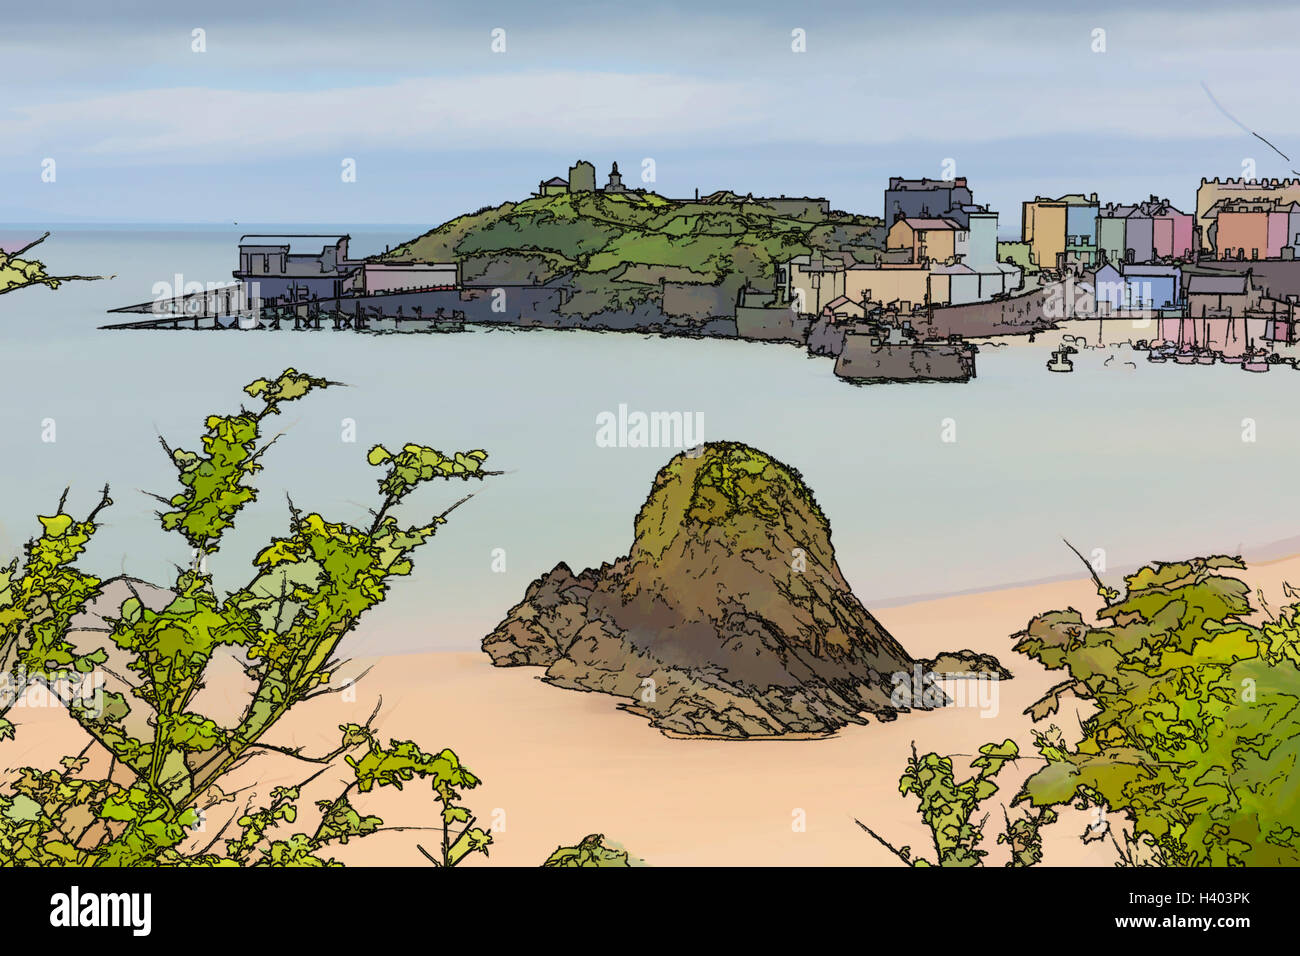 Tenby Wales uk harbour located in west of the country in Pembrokeshire  illustration Stock Photo